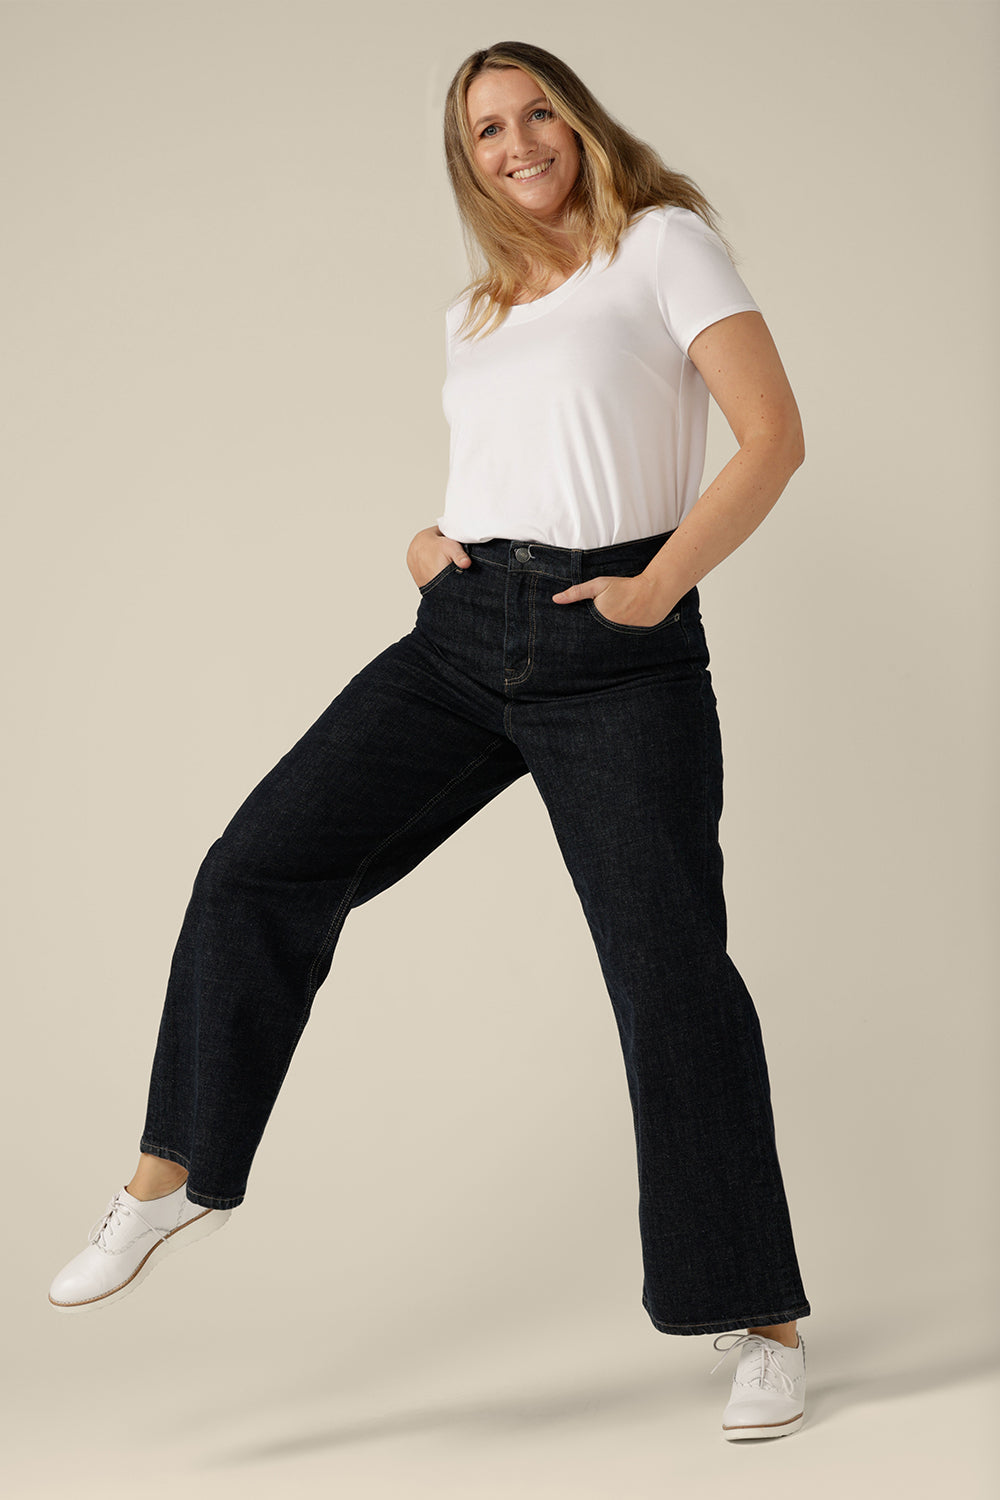 High-waisted, flared leg jeans in midnight denim, size 12. Ethically and sustainably made by Australian and New Zealand women's clothing label, L&F, these tailored jeans are worn with a white bamboo top.